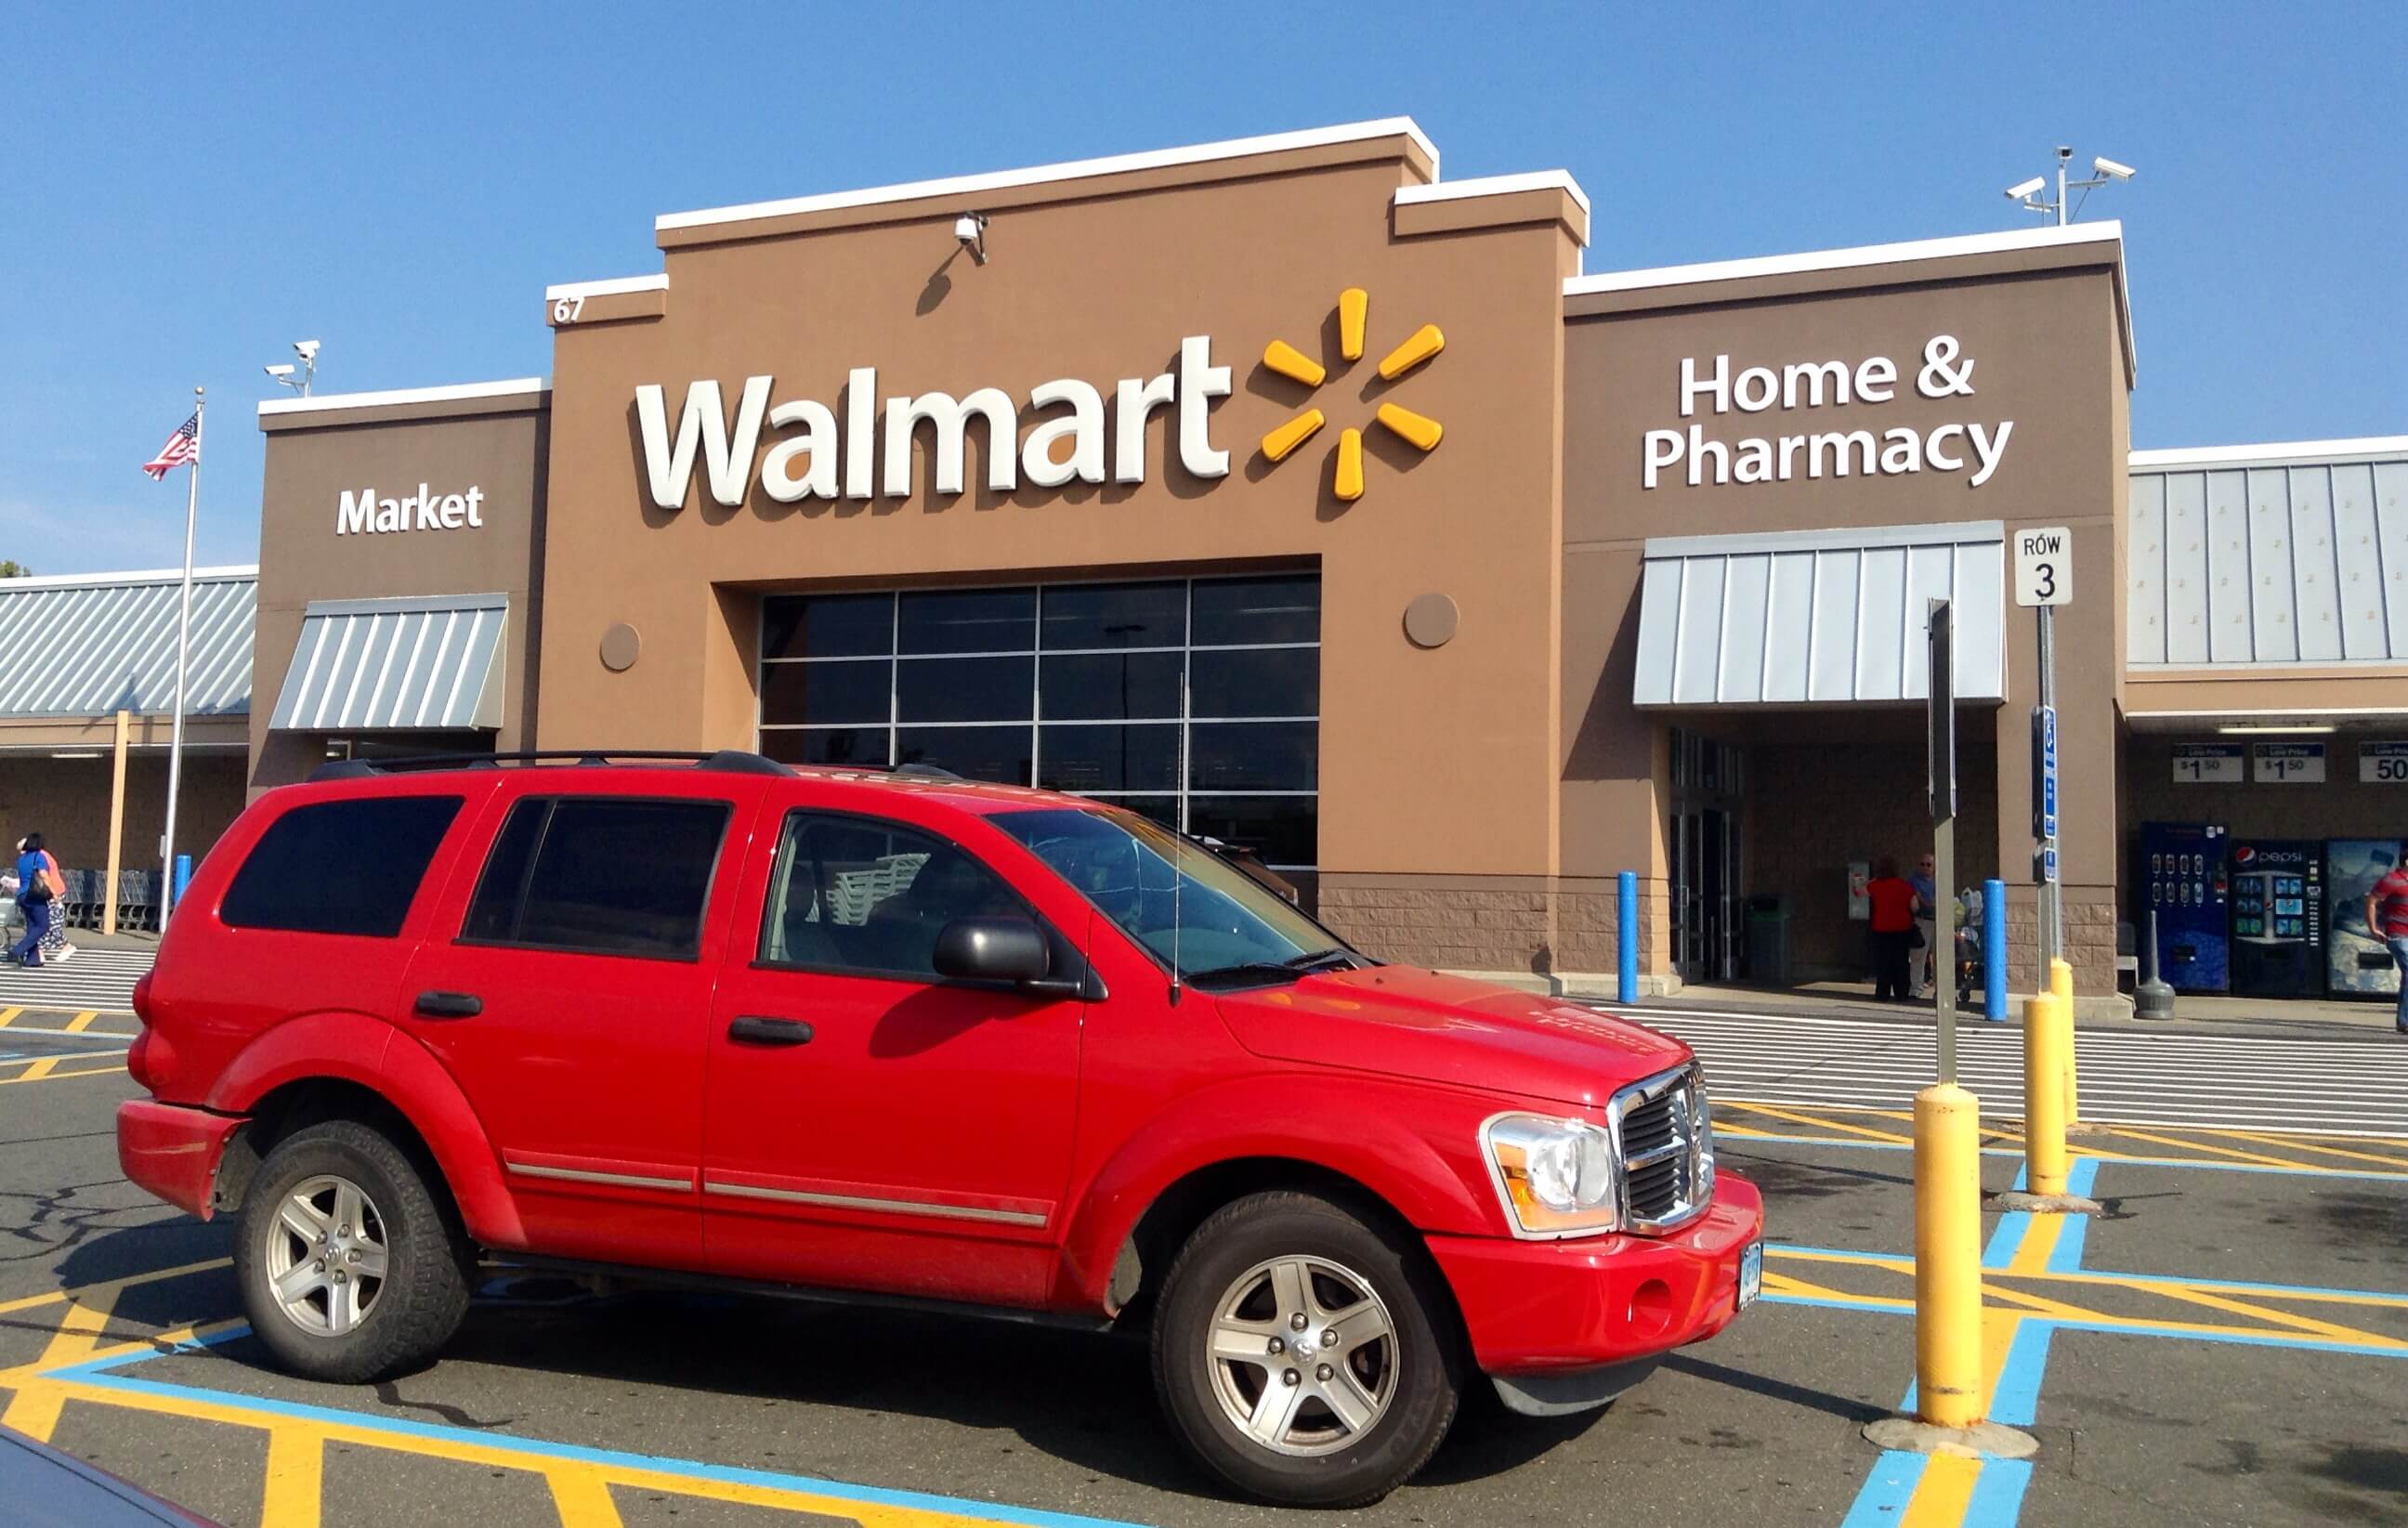 Red SUV in front of Walmart